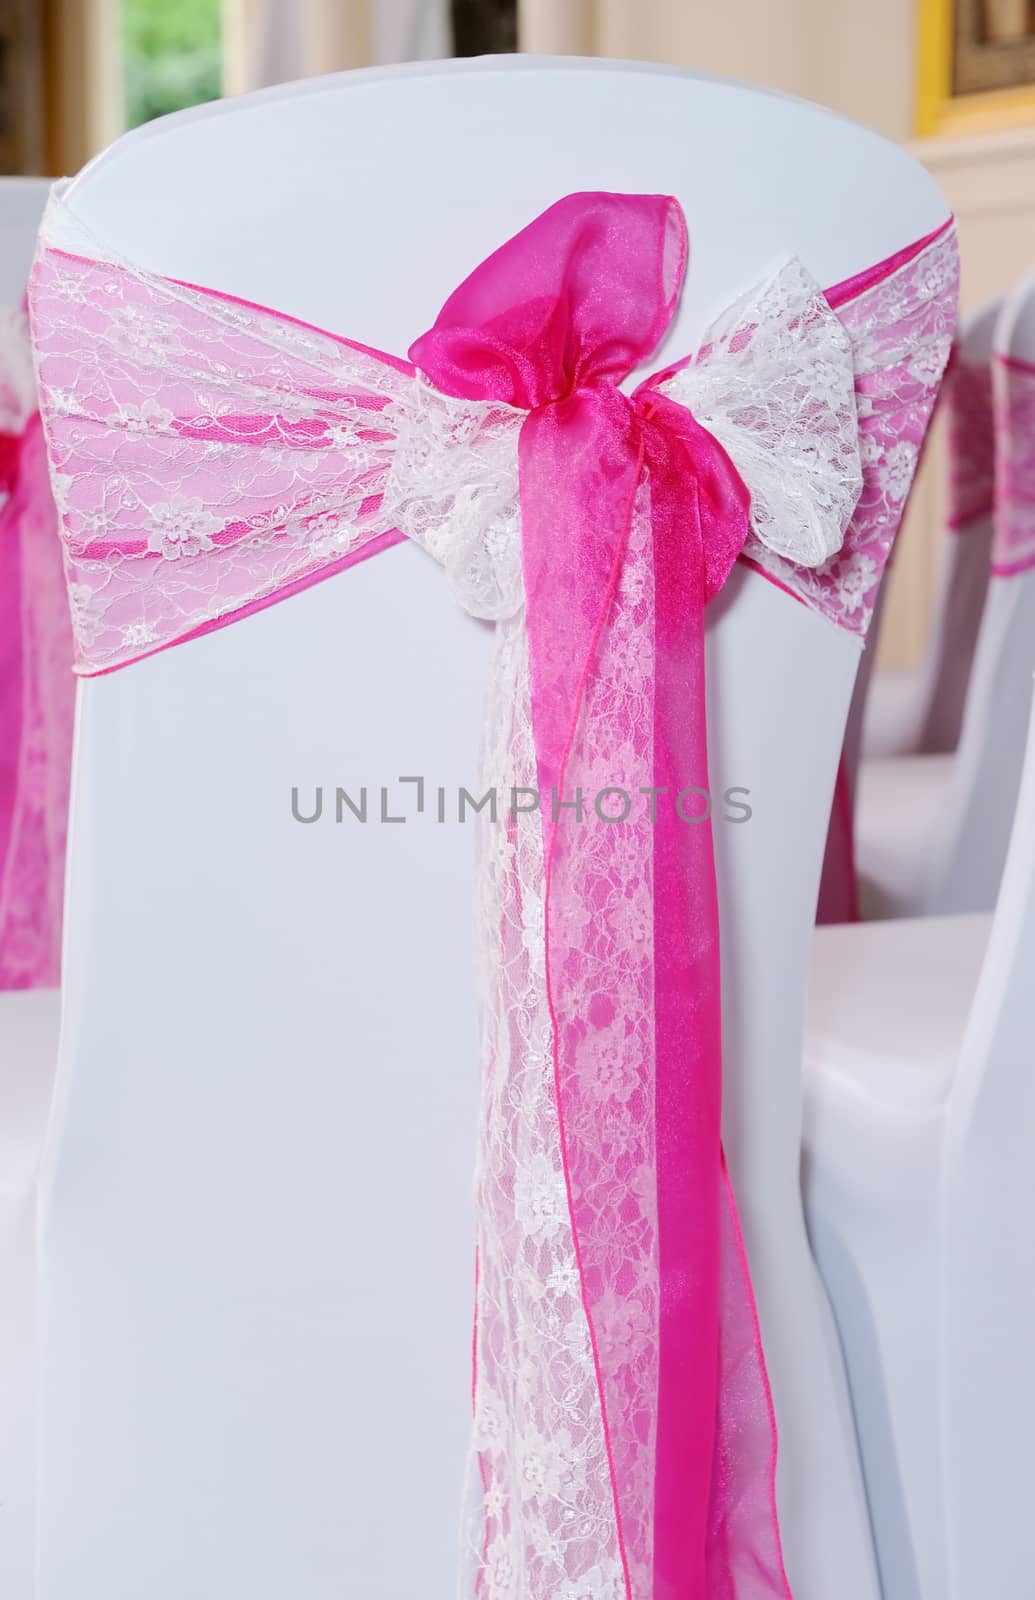 Wedding chair cover by kmwphotography